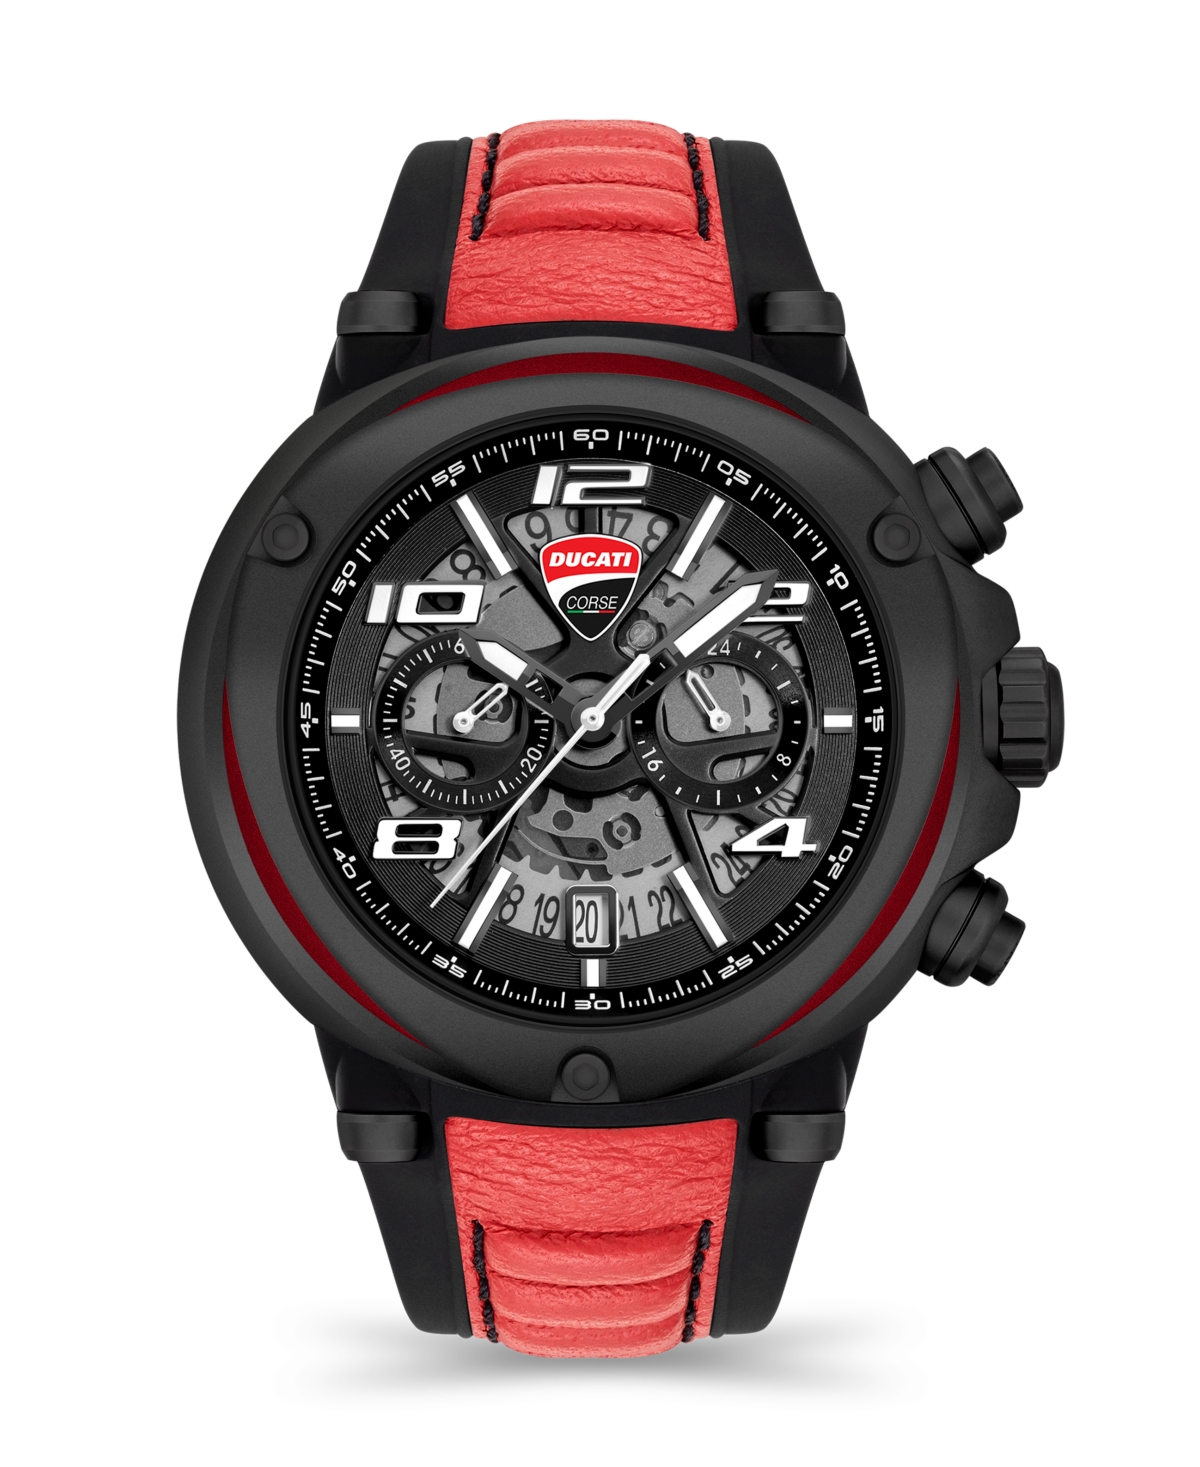 Ducati Corse Men's Partenza Collection Chronograph Timepiece Black Silicon with Red Leather Strap Watch, 49mm